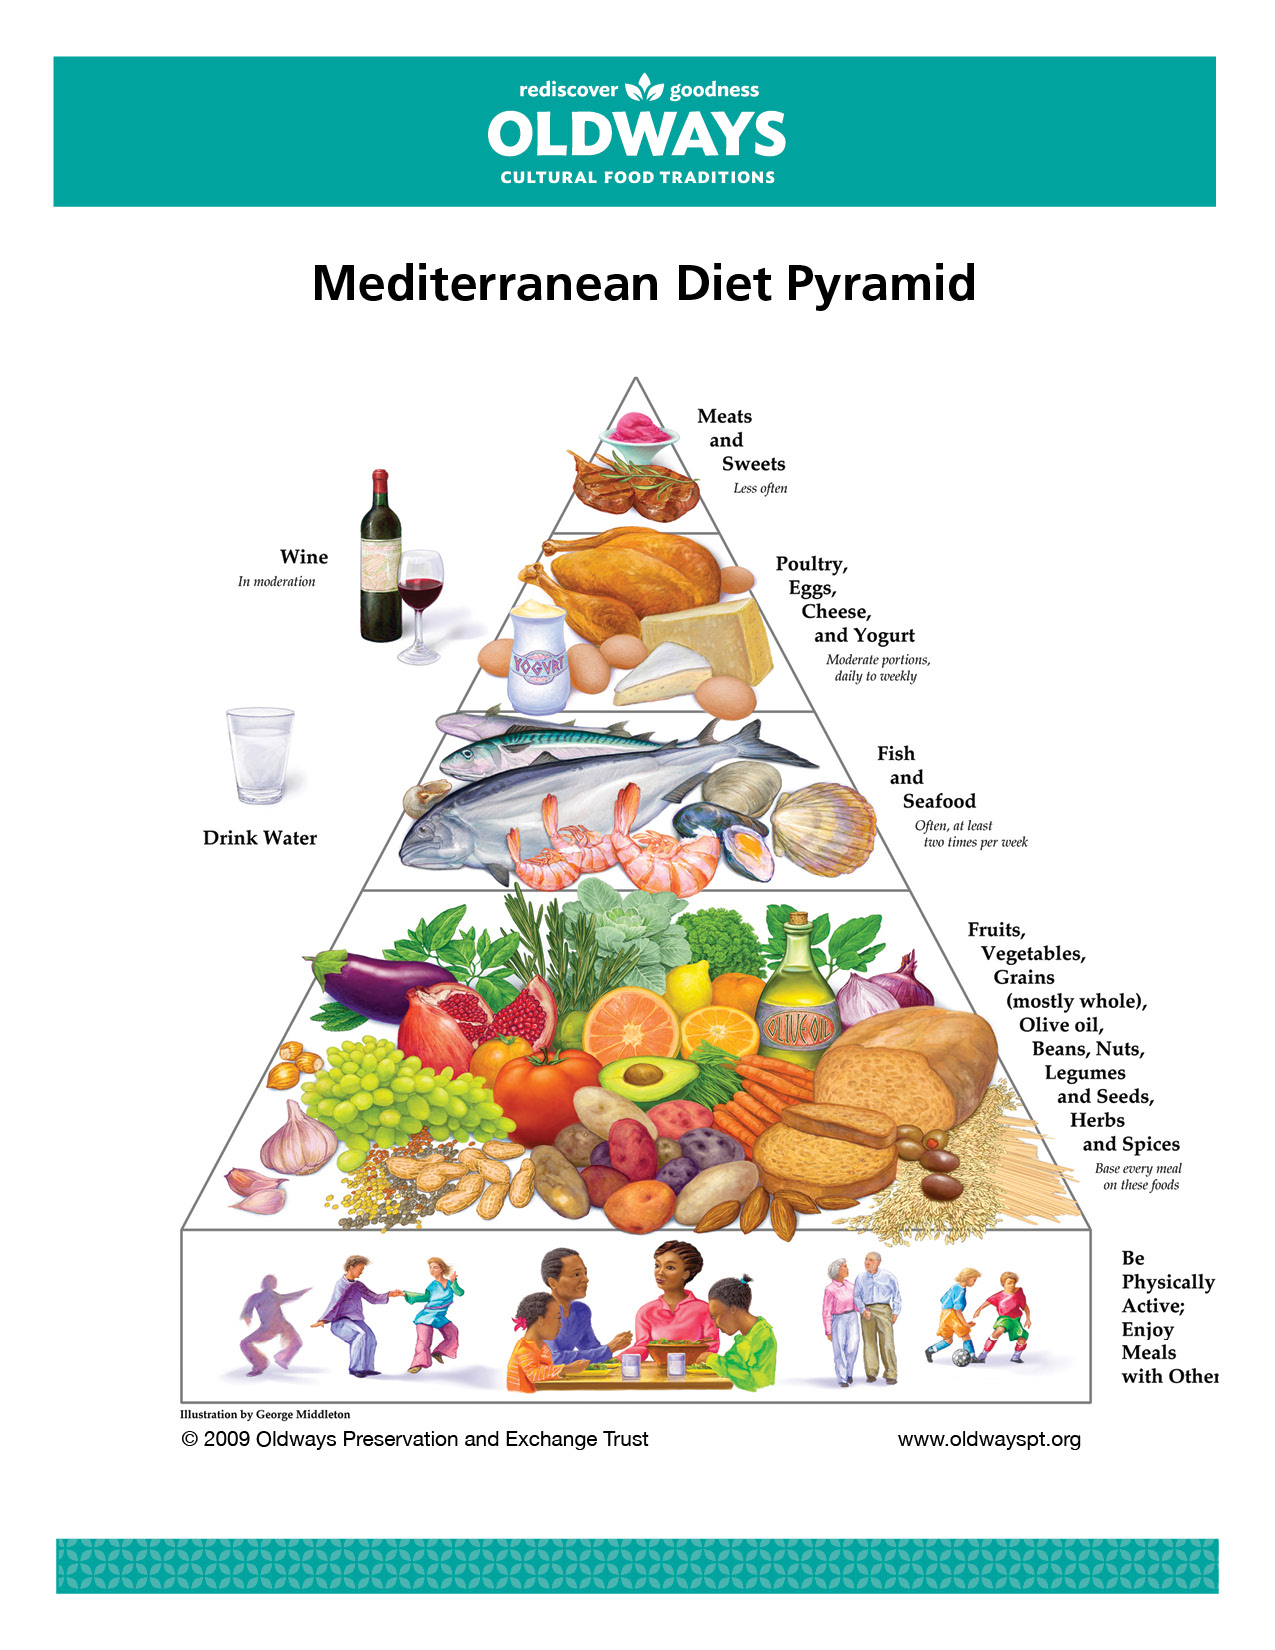 Mediterranean diet reduces women’s cardiovascular disease and death risk by a quarter, finds study